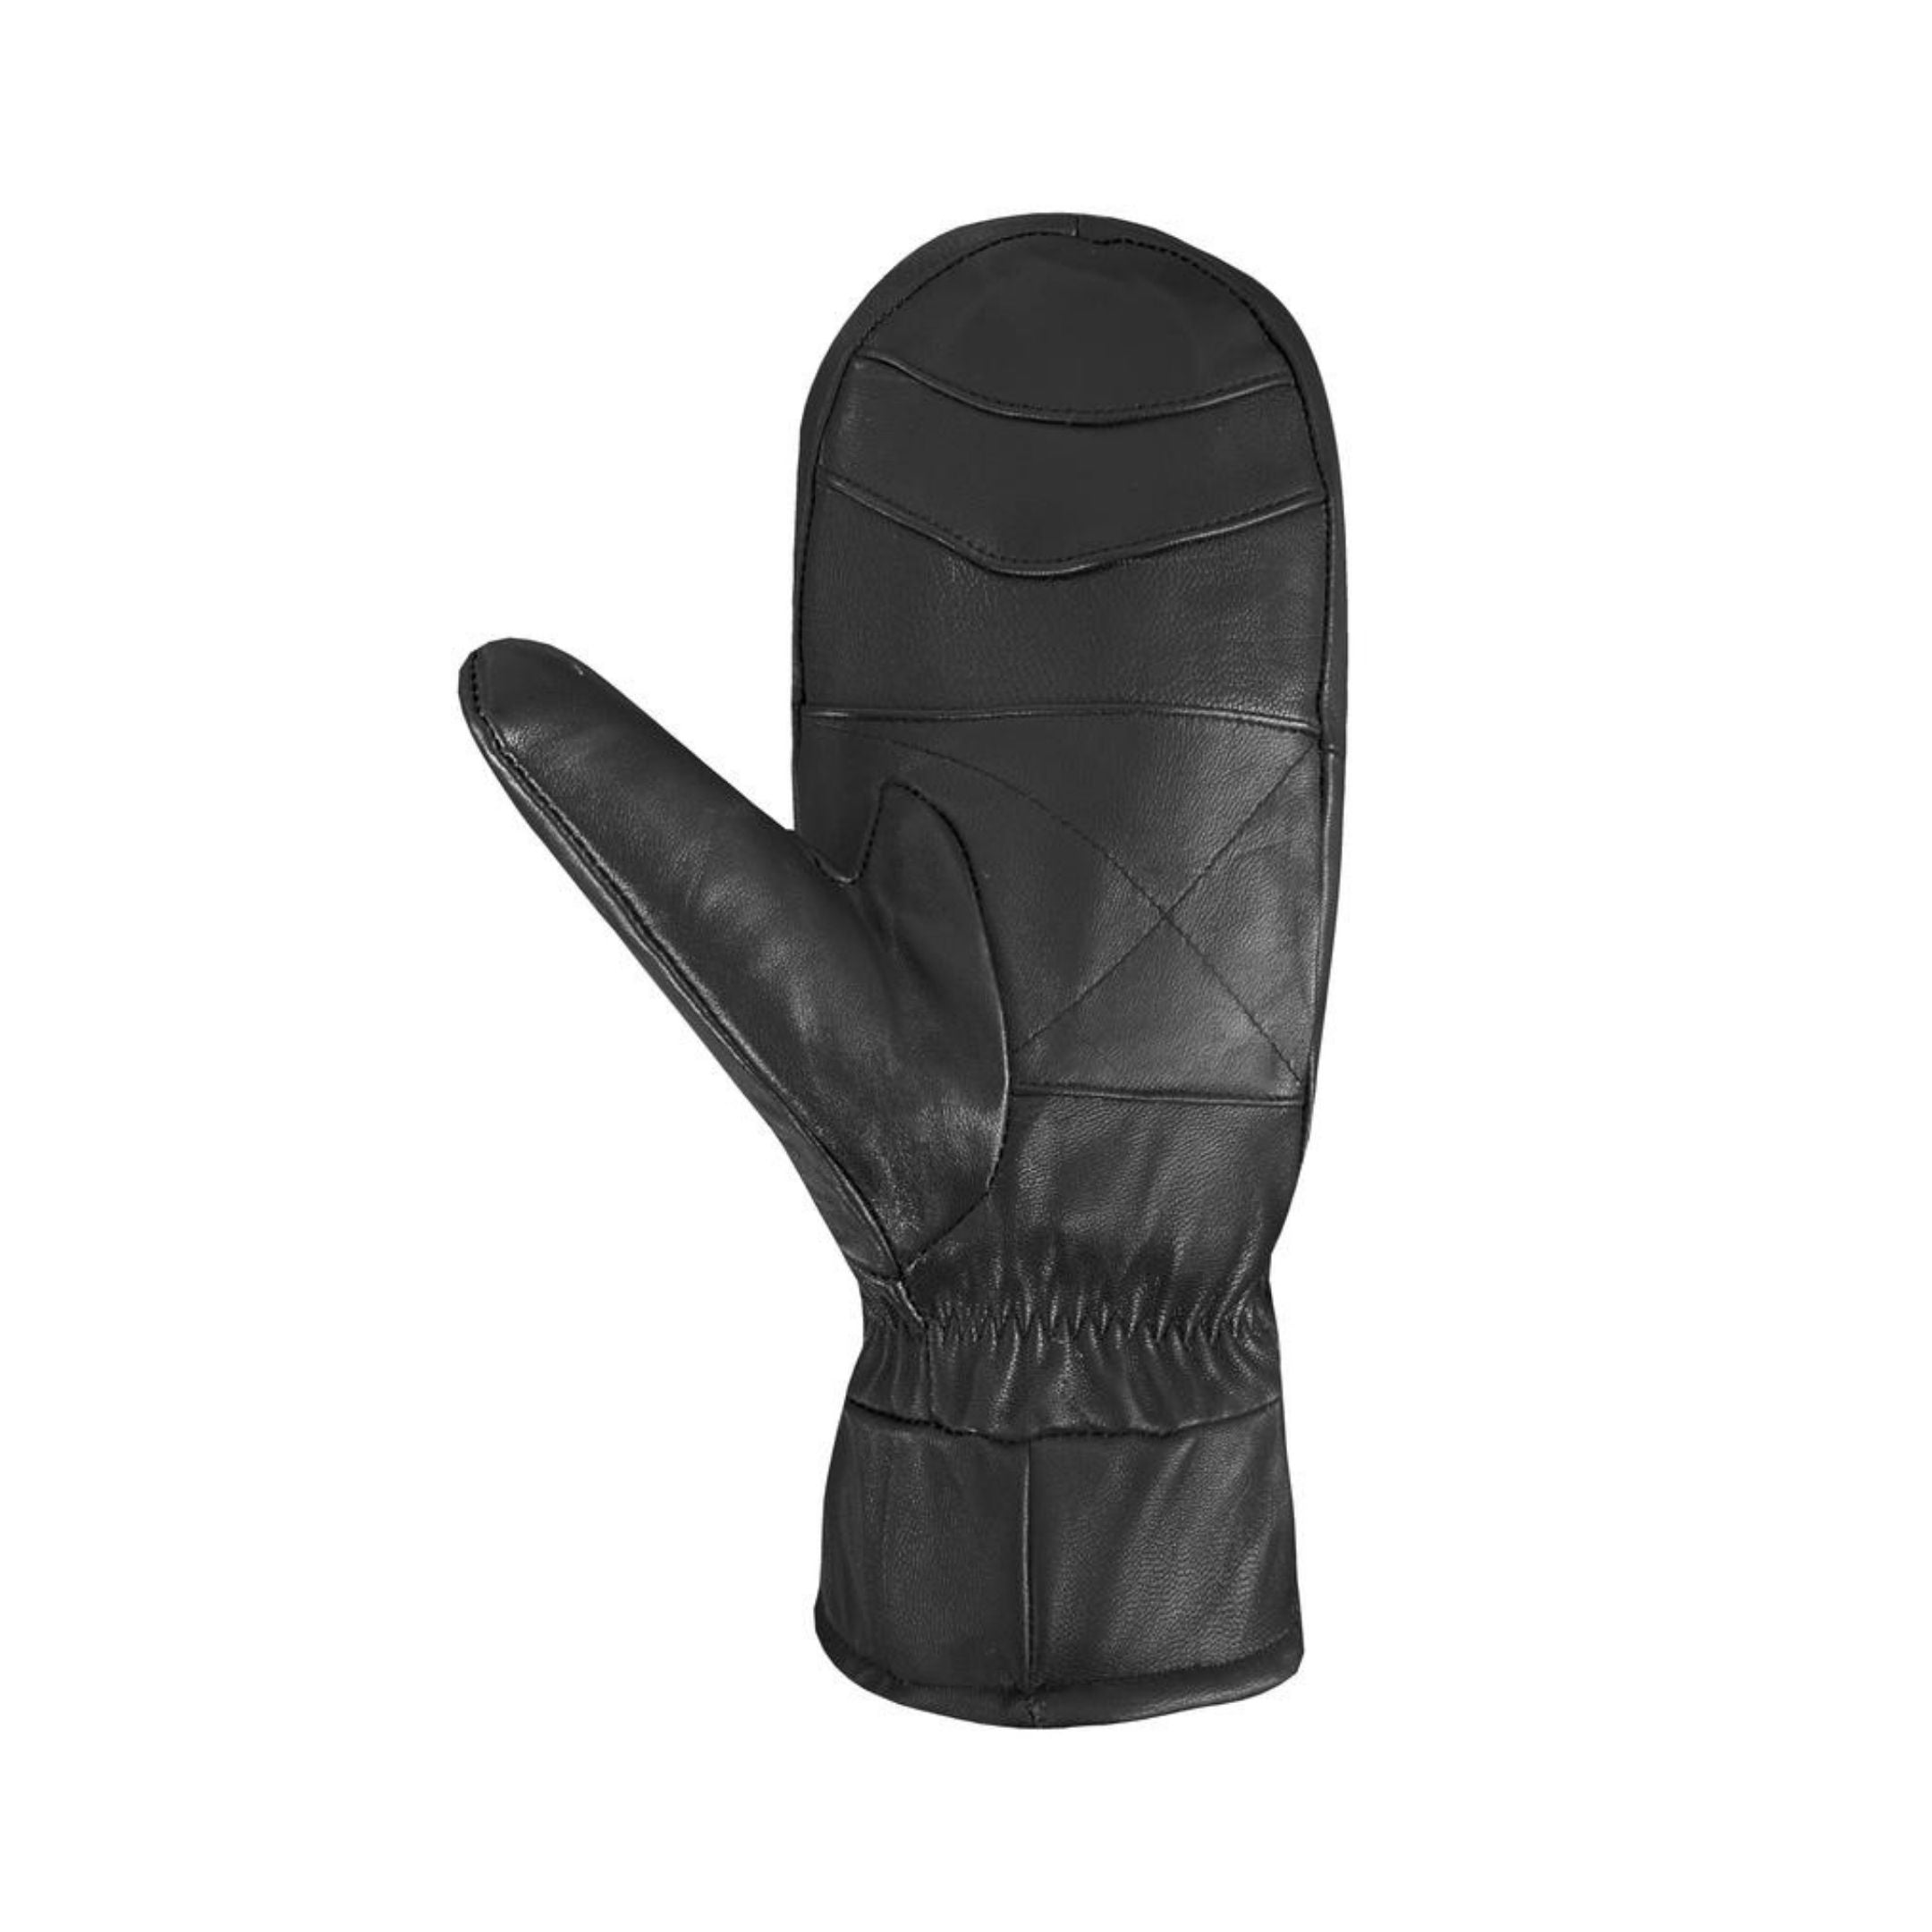 Palm side of black leather mittens with stitched details. 